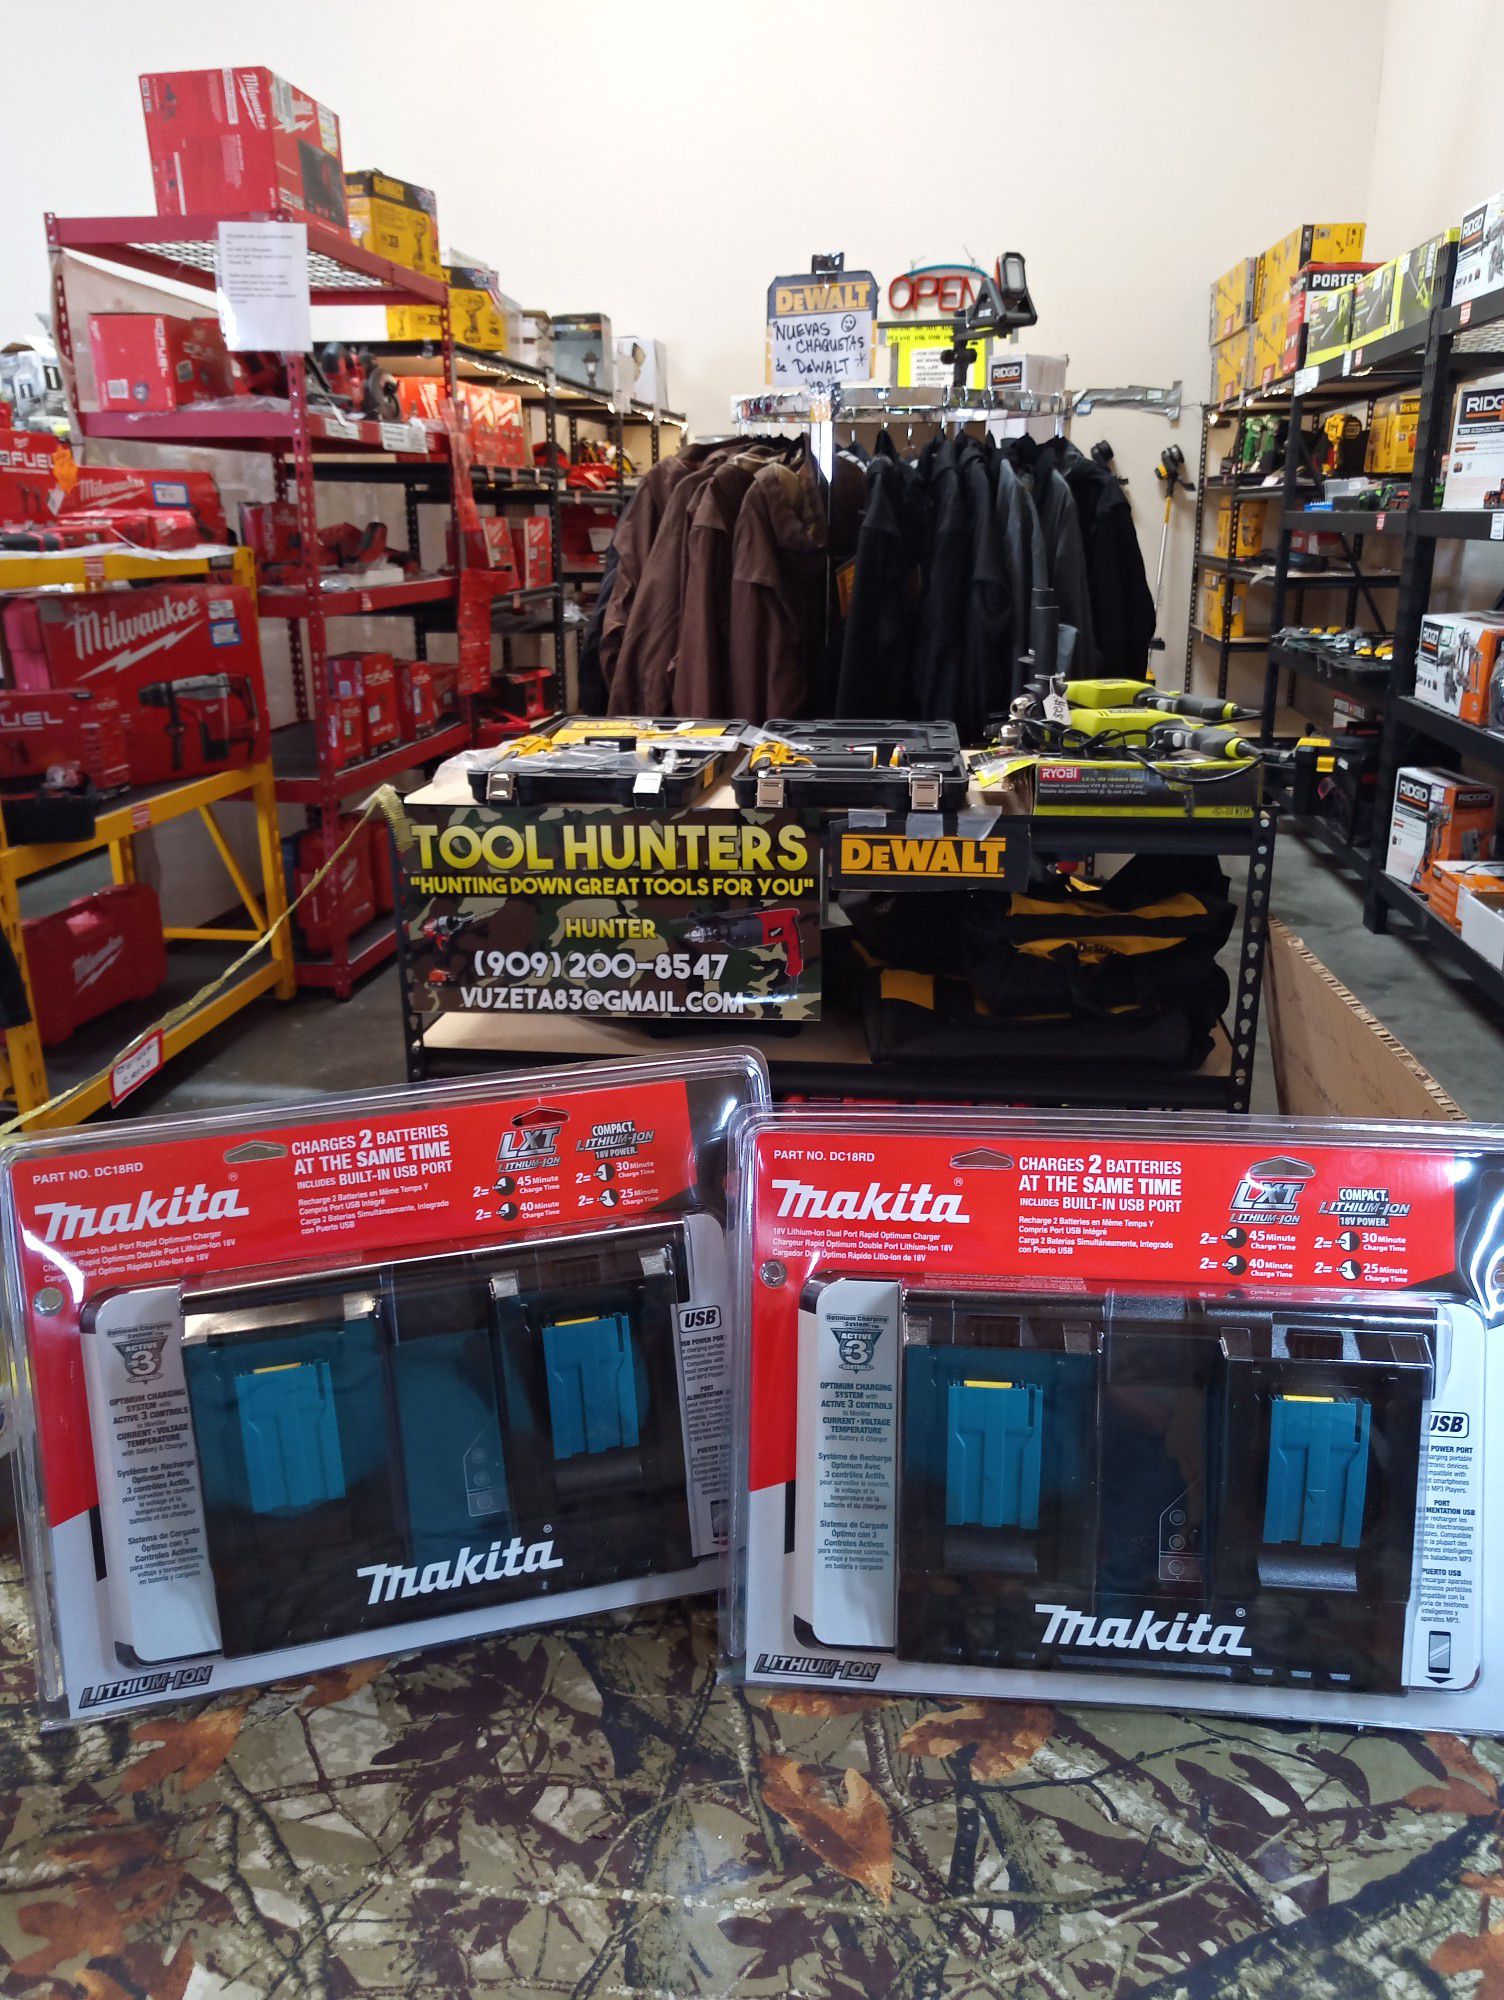 ABSOLUTELY BRAND NEW MAKITA 18 VOLT DUAL PORT RAPID CHARGERS WITH USB POWER PORTS ! BRAND NEW !! $60 EACH FIRM PLEASE